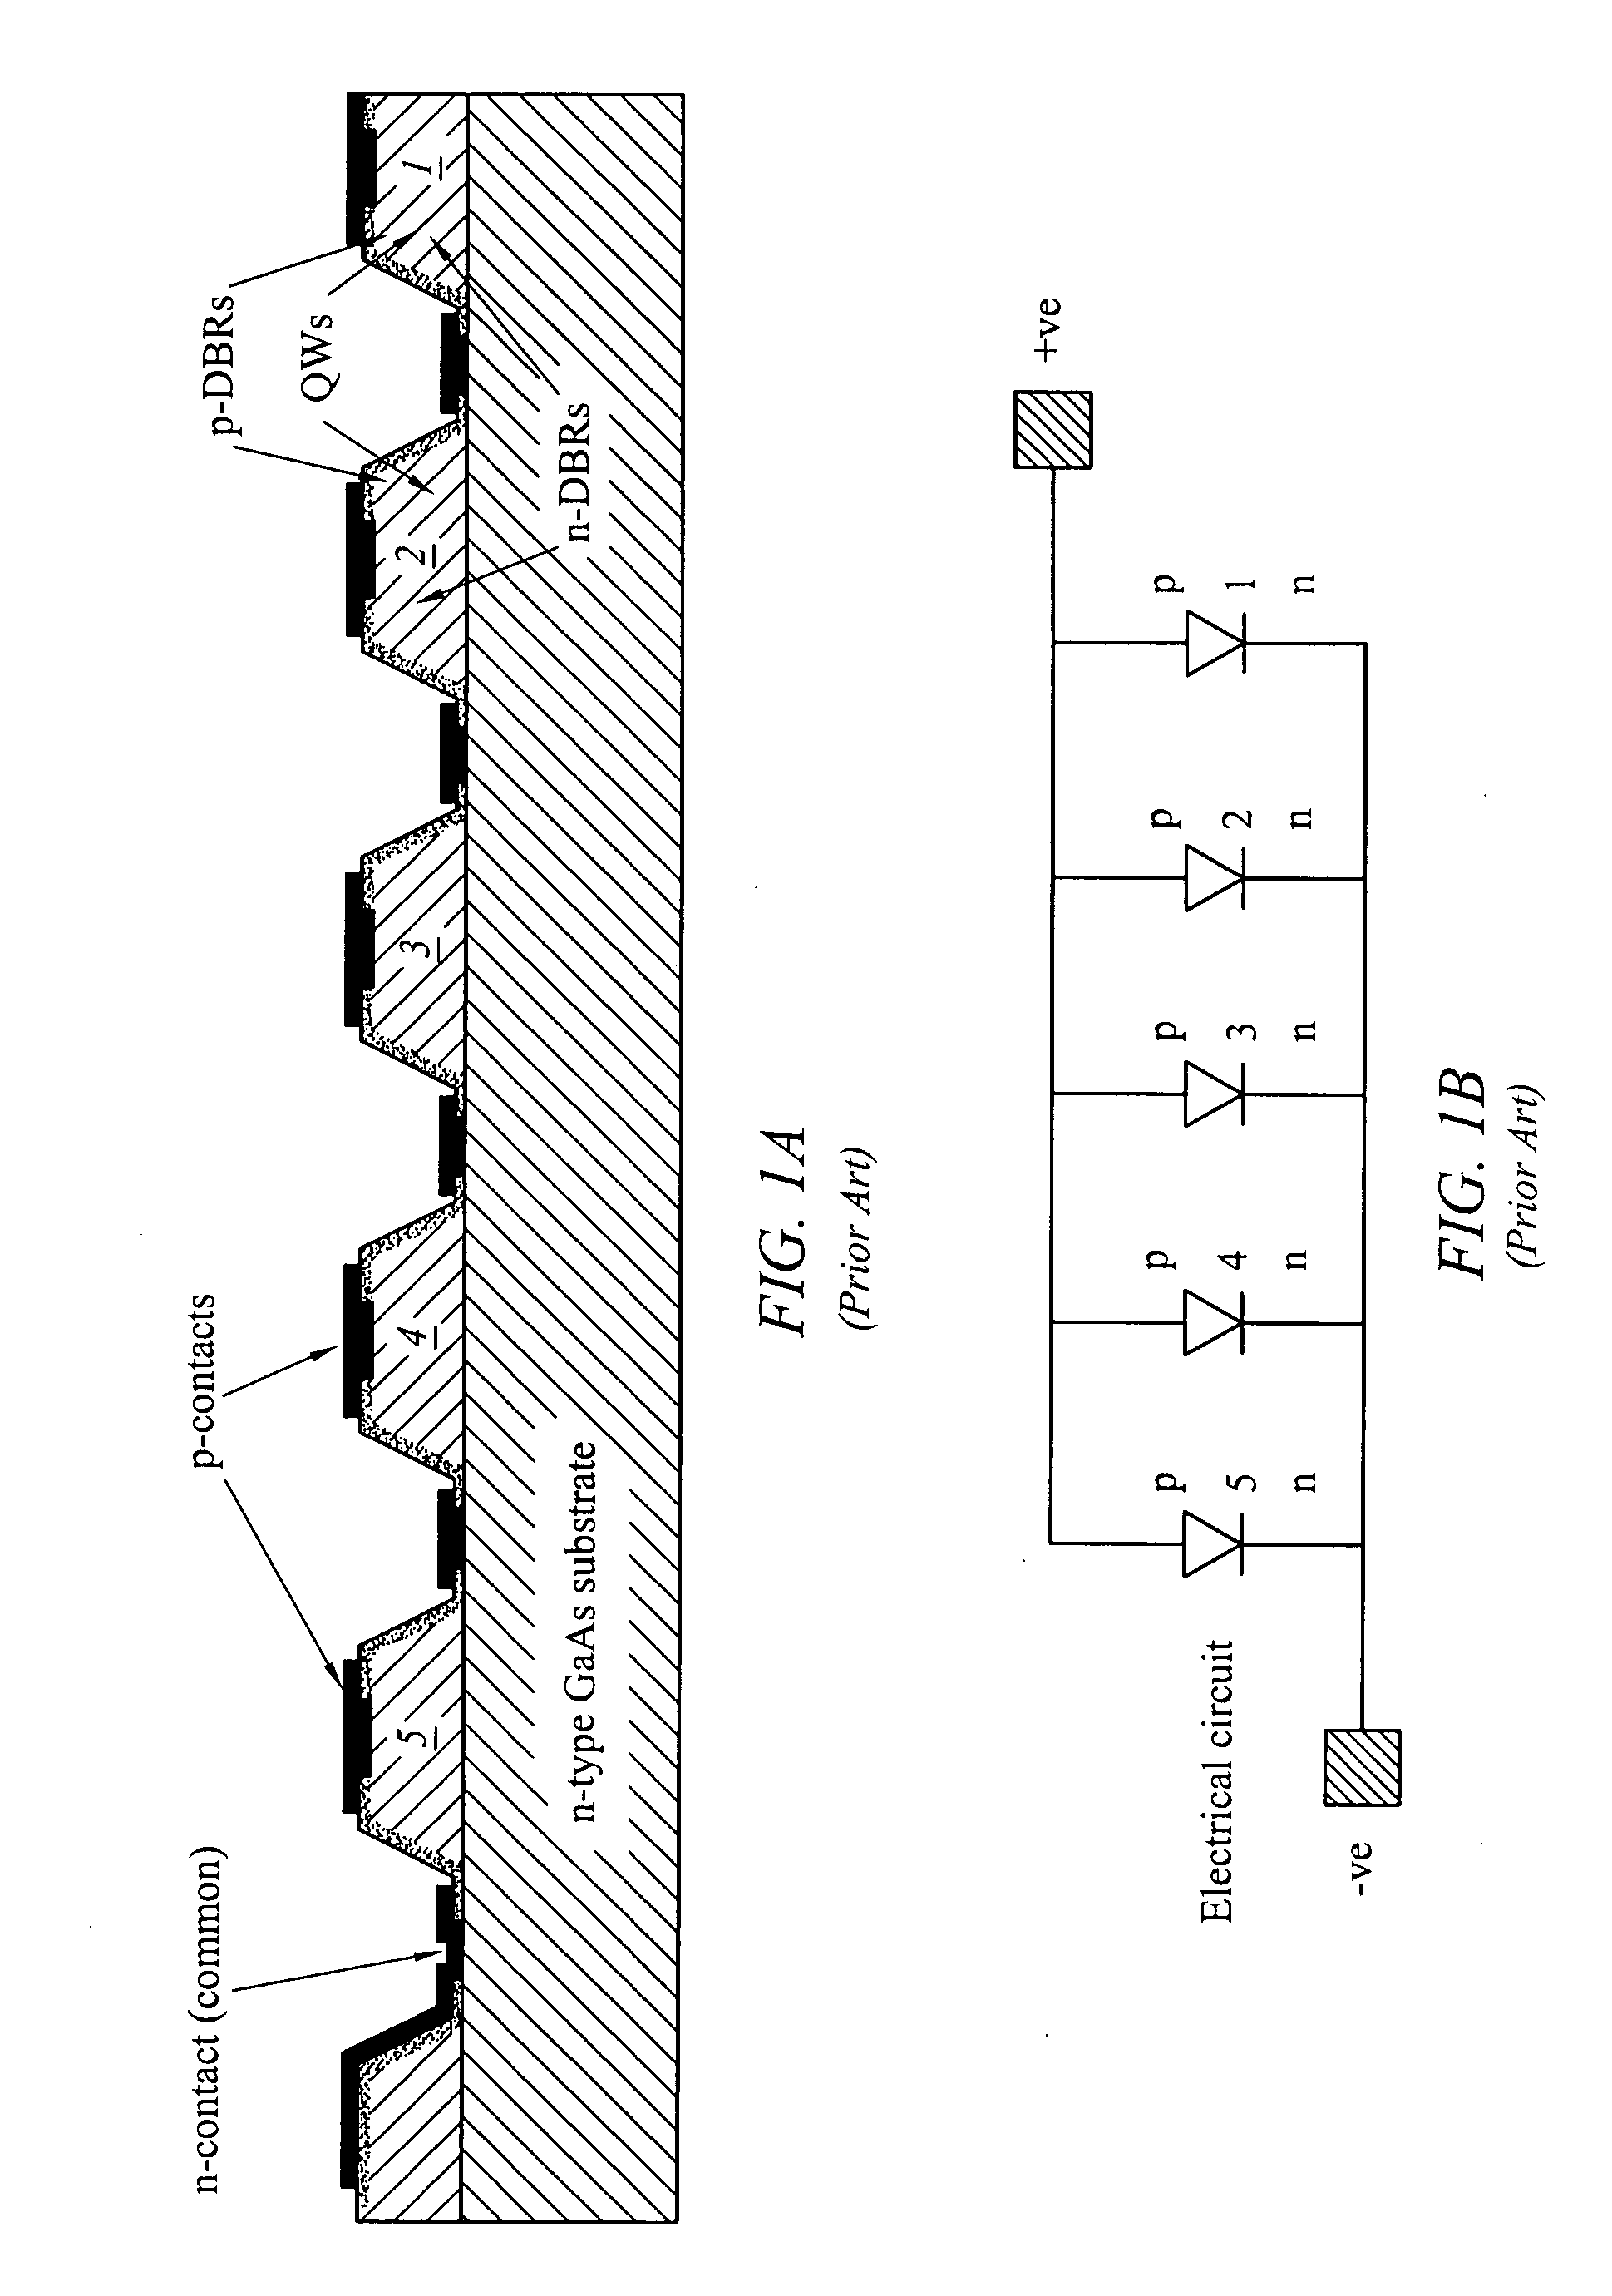 Apparatus, system, and method for junction isolation of arrays of surface emitting lasers